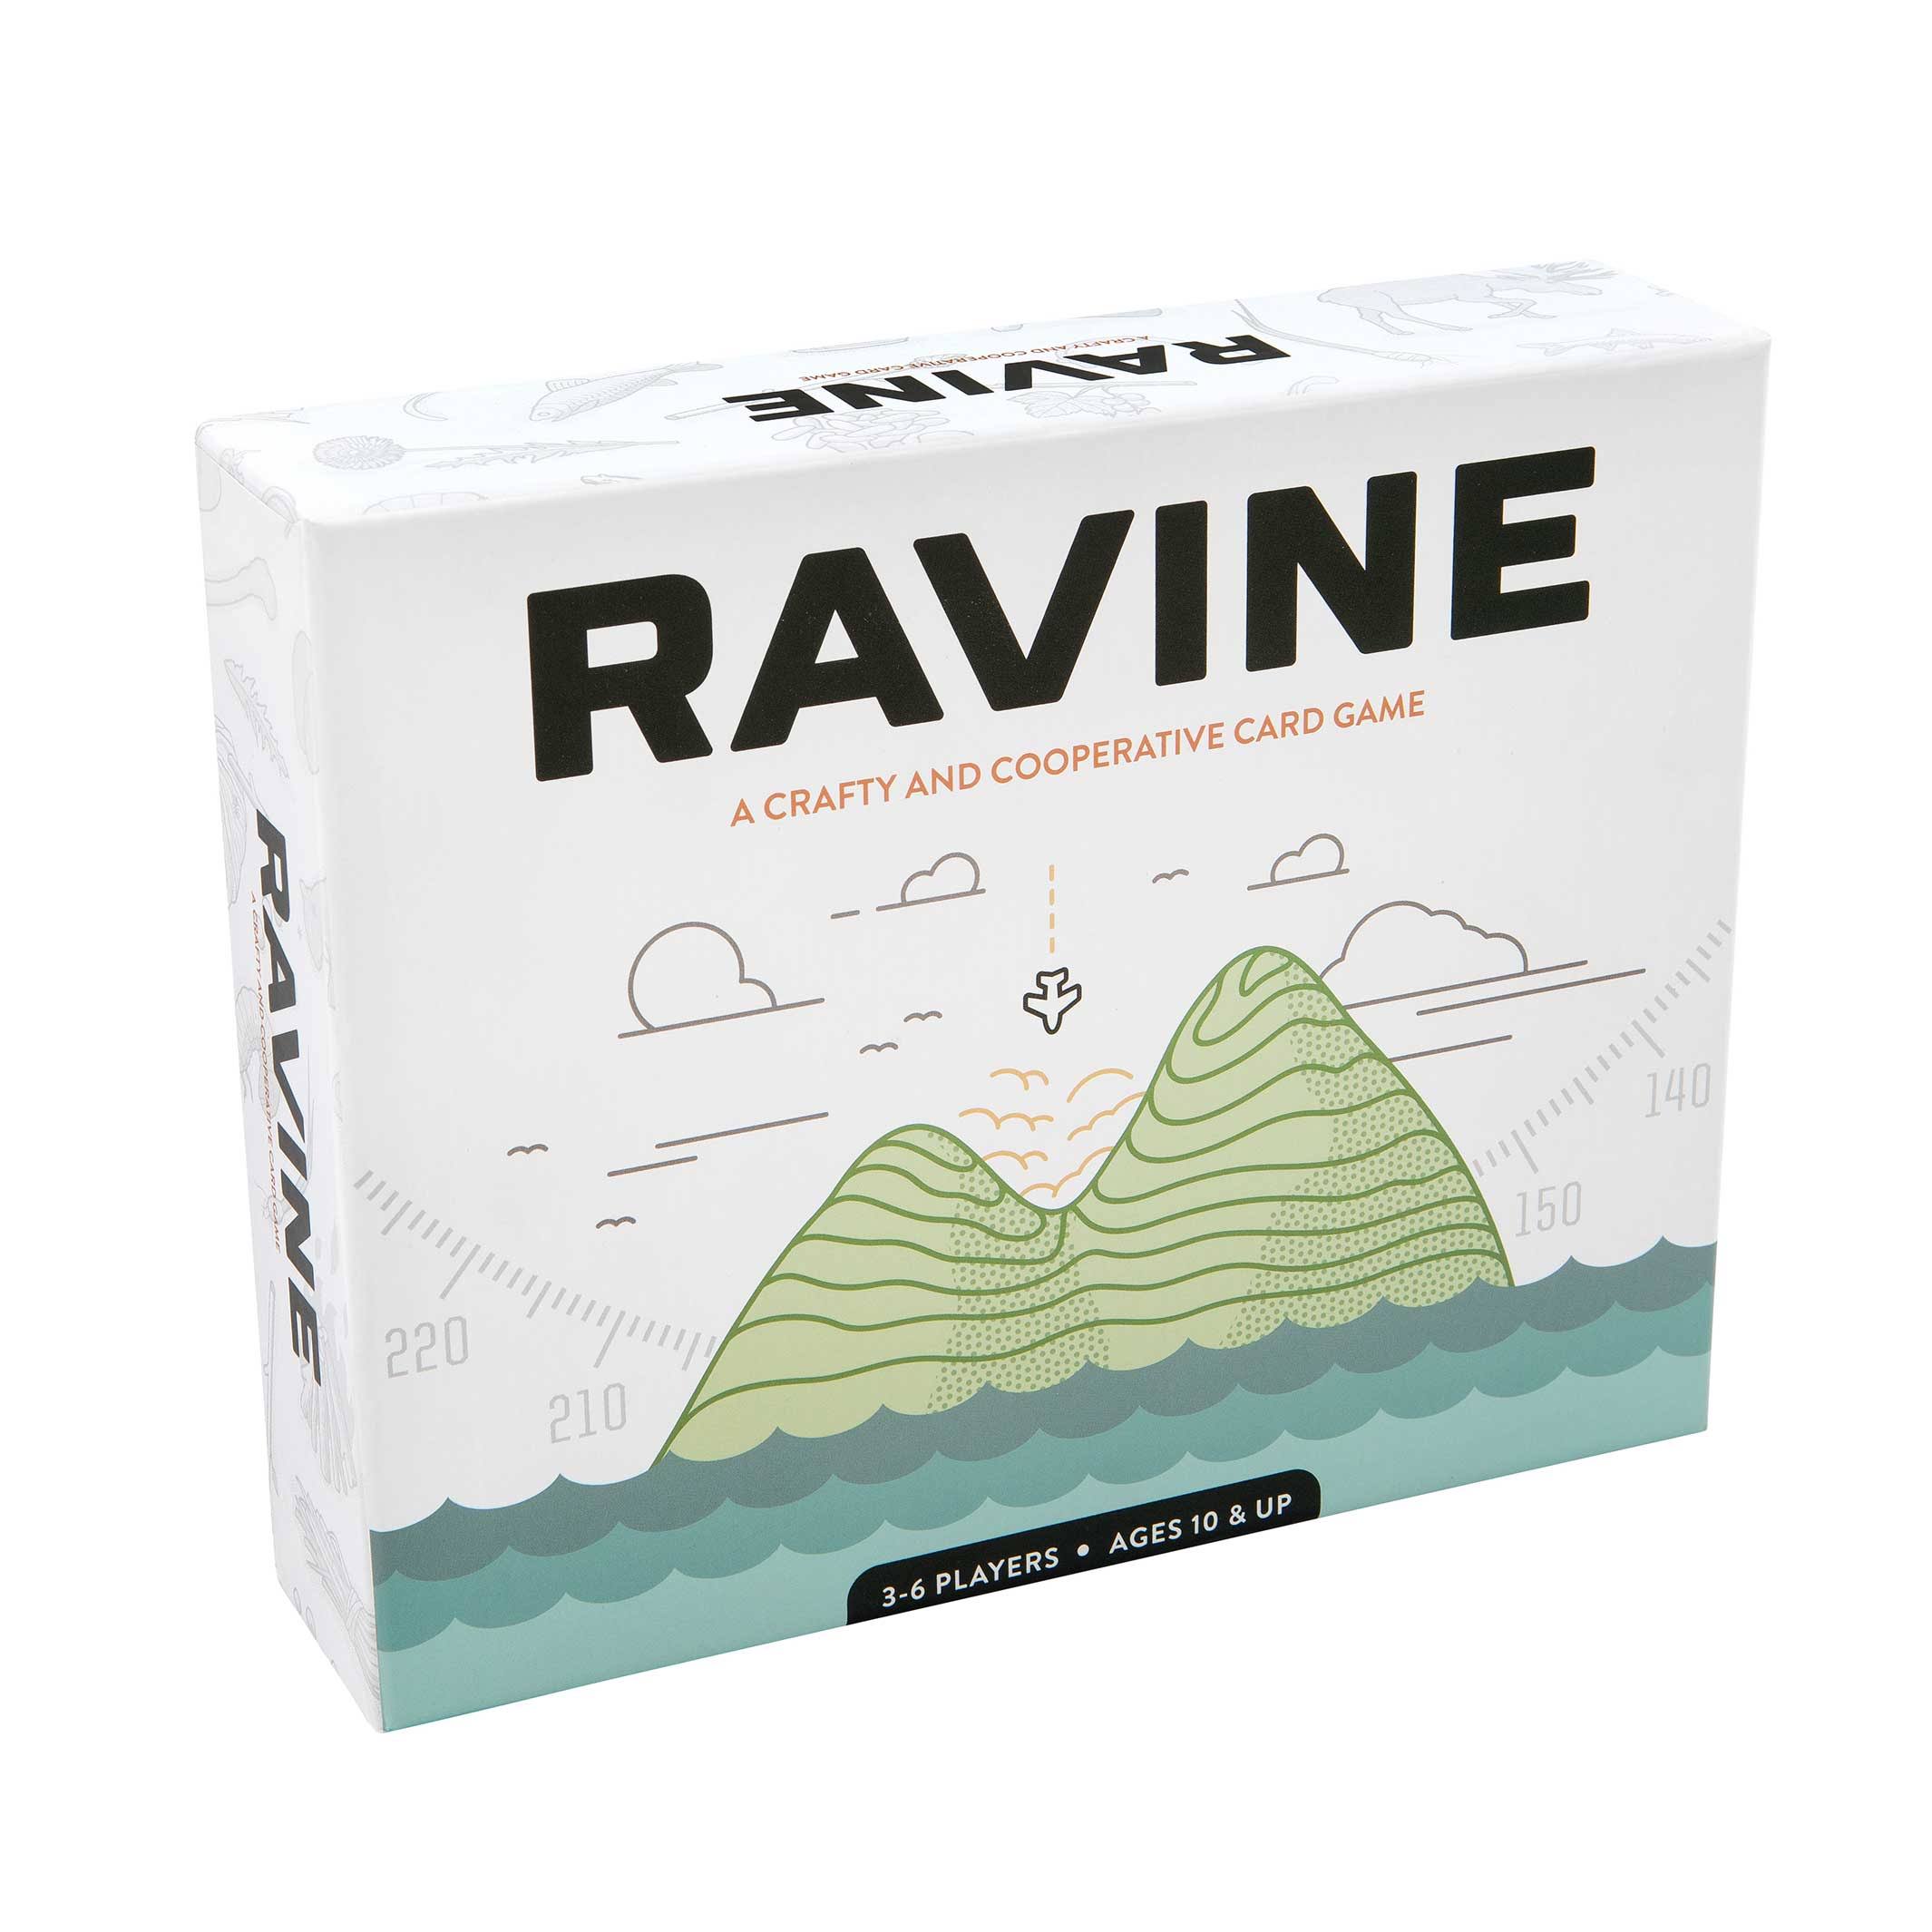 Ravine A Crafty and Cooperative Card Game